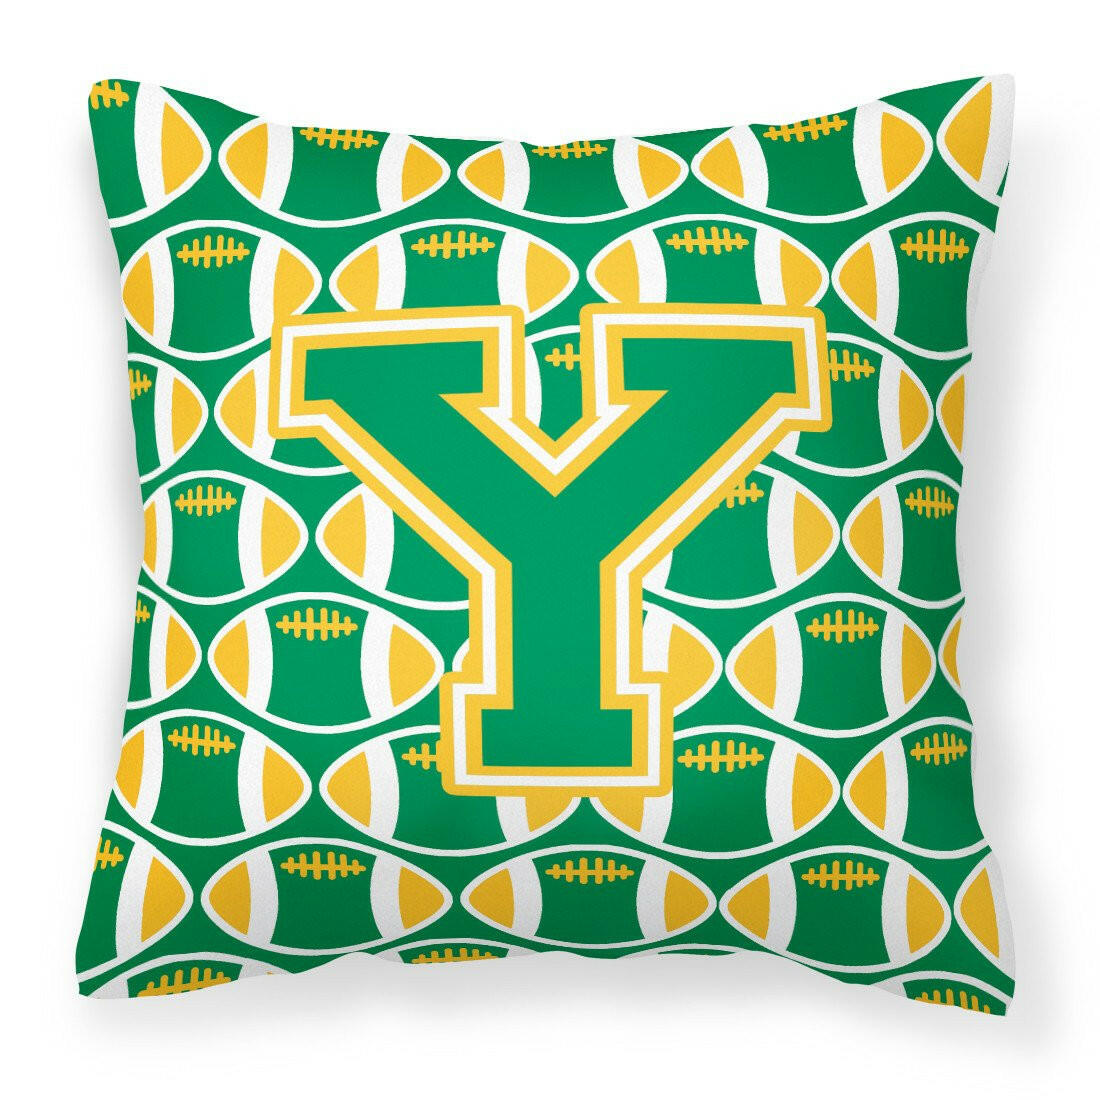 Letter Y Football Green and Gold Fabric Decorative Pillow CJ1069-YPW1414 by Caroline's Treasures